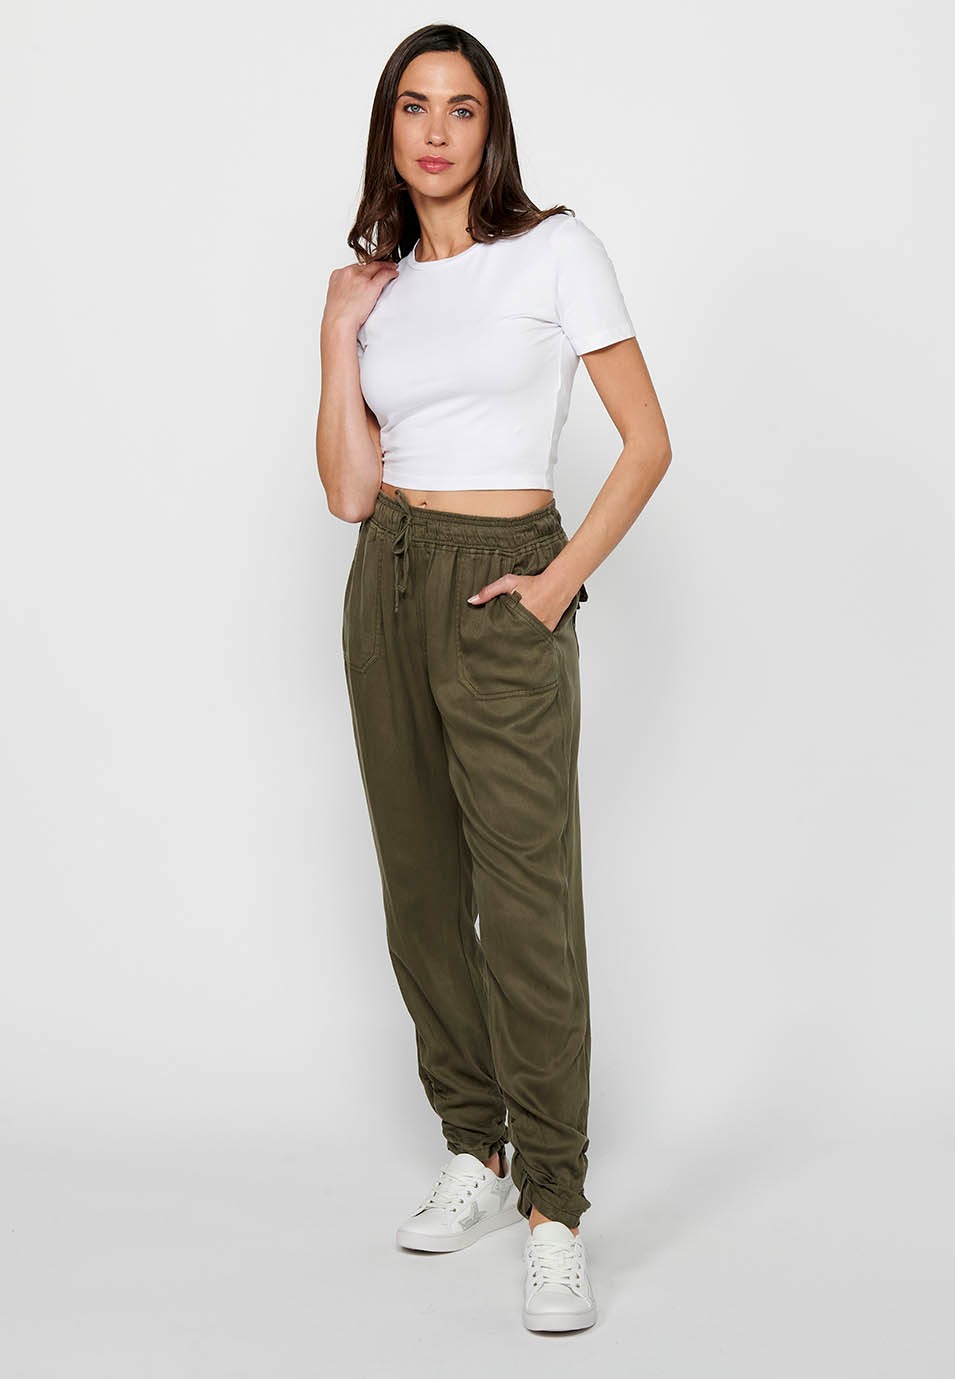 Long jogger pants with curled finish and rubberized waist with four pockets, two rear pockets with flap in Khaki color for women